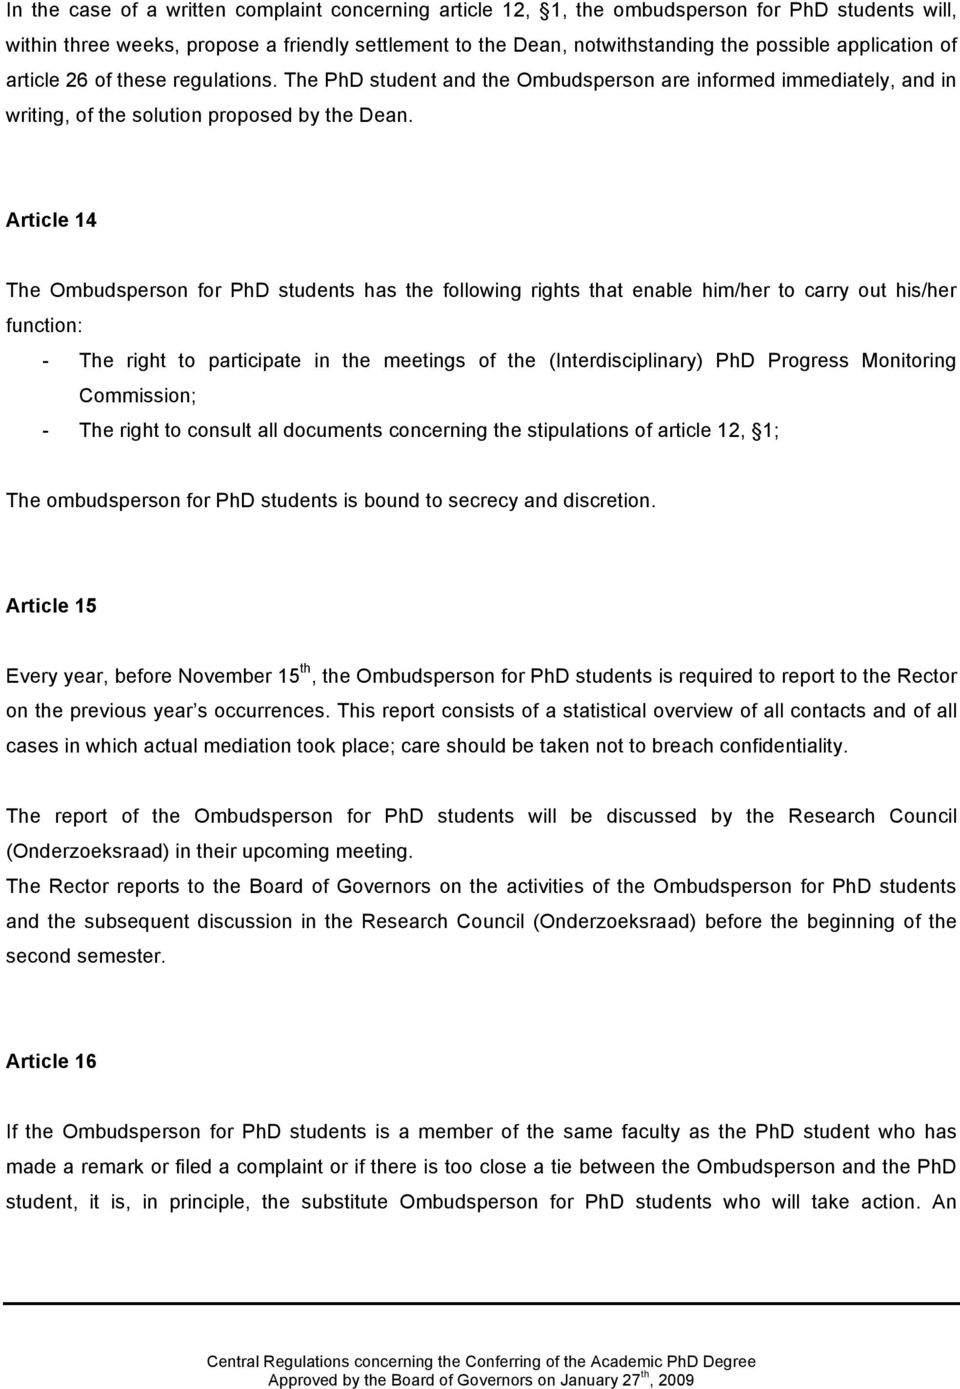 Article 14 The Ombudsperson for PhD students has the following rights that enable him/her to carry out his/her function: - The right to participate in the meetings of the (Interdisciplinary) PhD